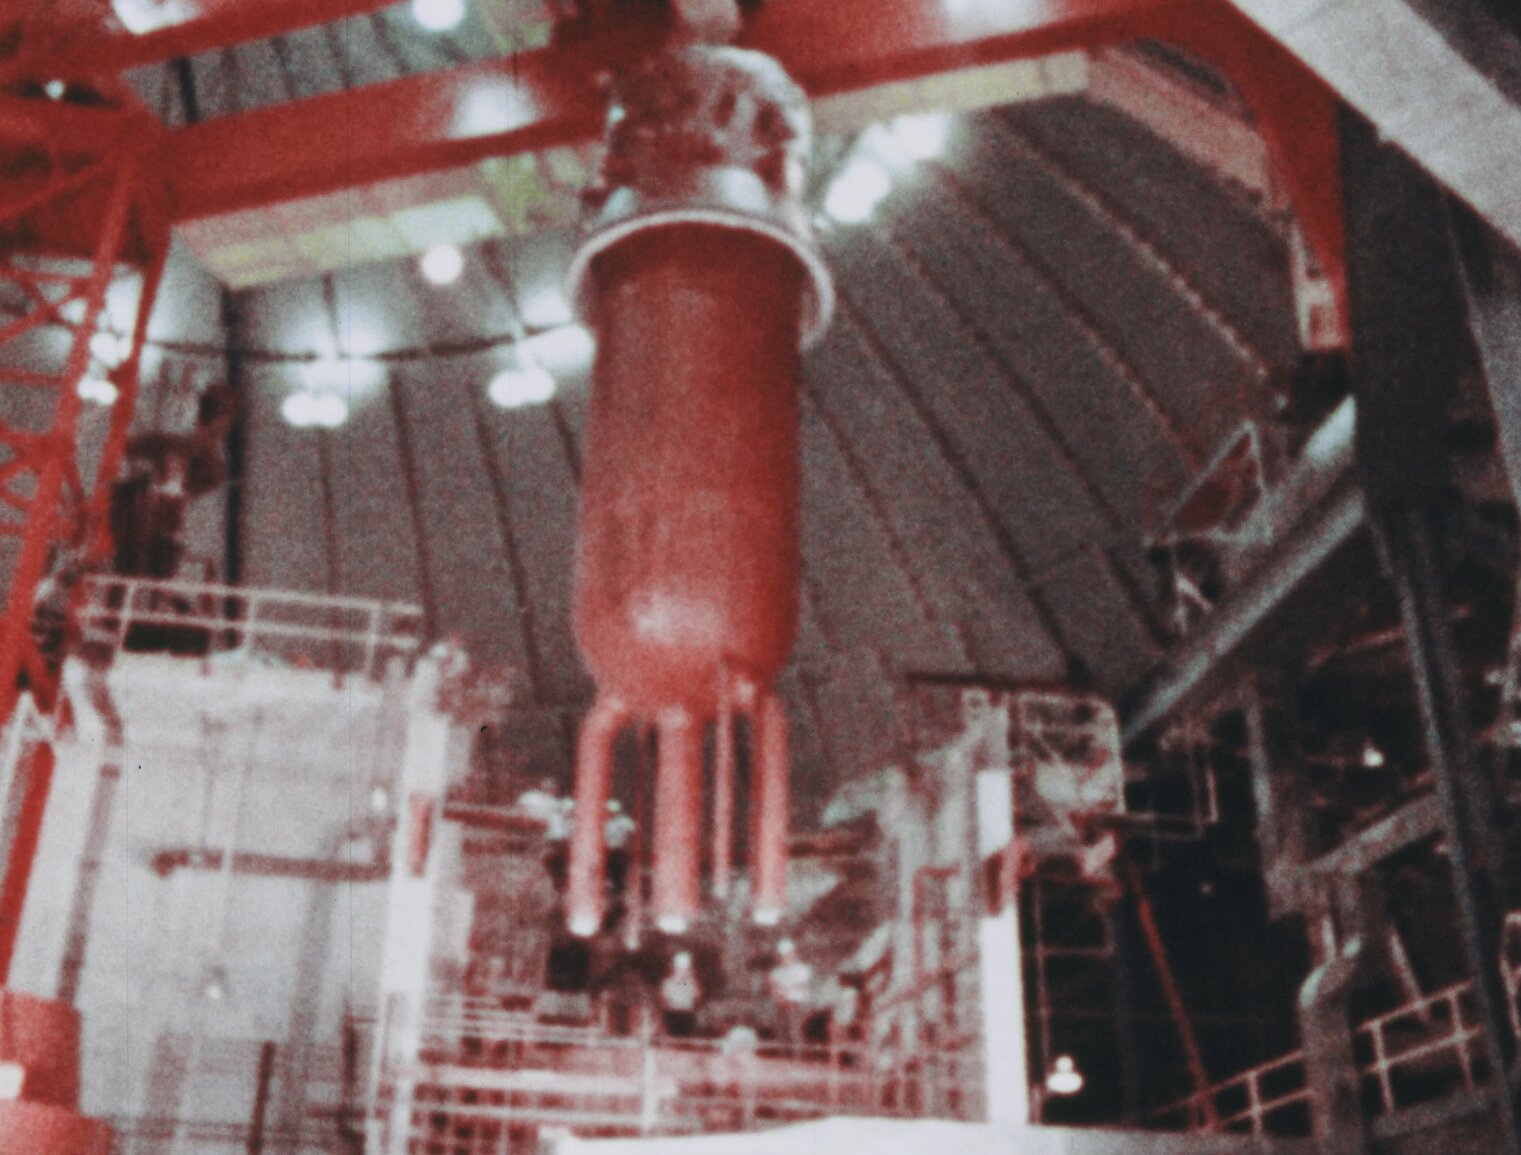 Pressure vessel in BONUS dome now being lifted by large internal crane. Several men in hardhats are seen in the background